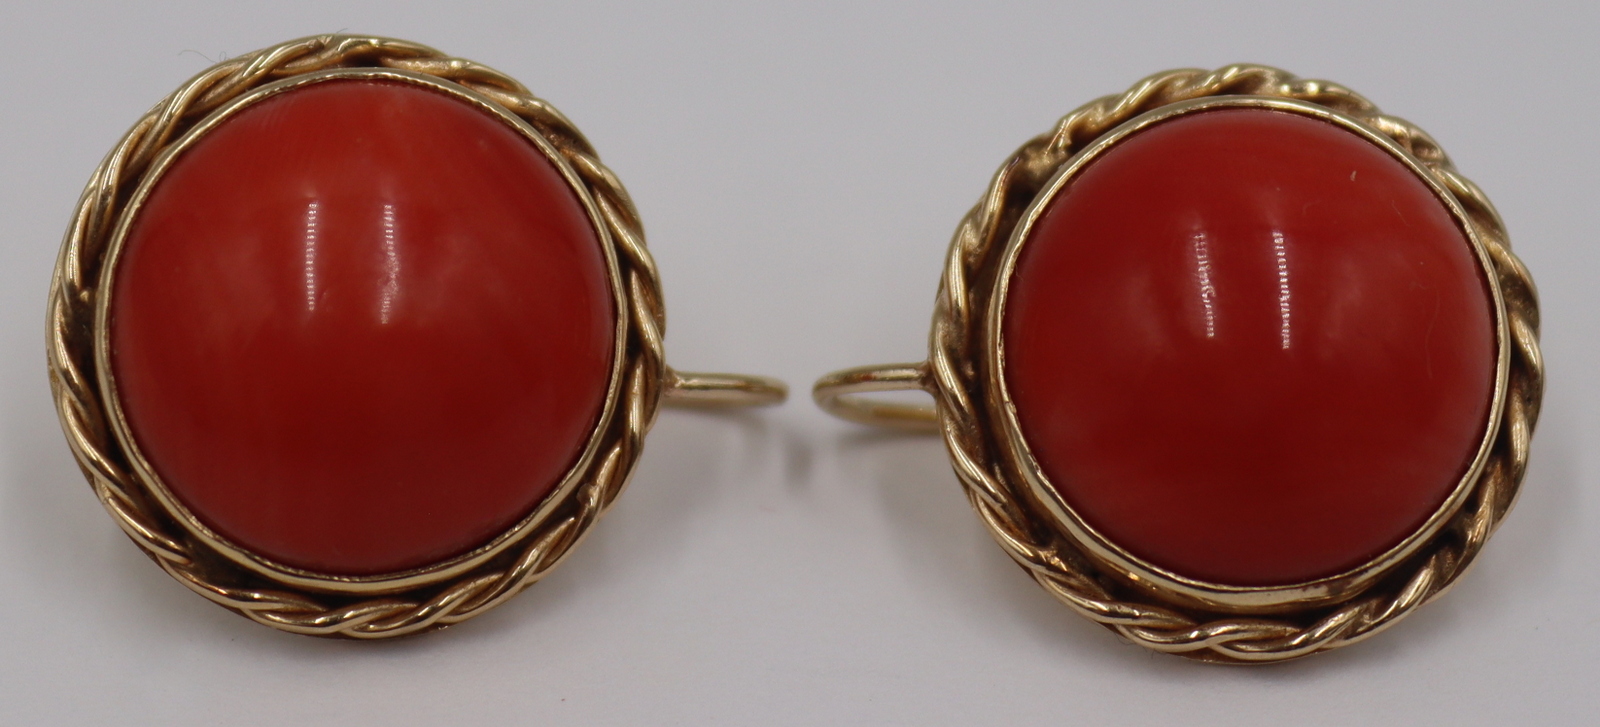 JEWELRY 14KT GOLD AND CORAL CABOCHON 3bc003